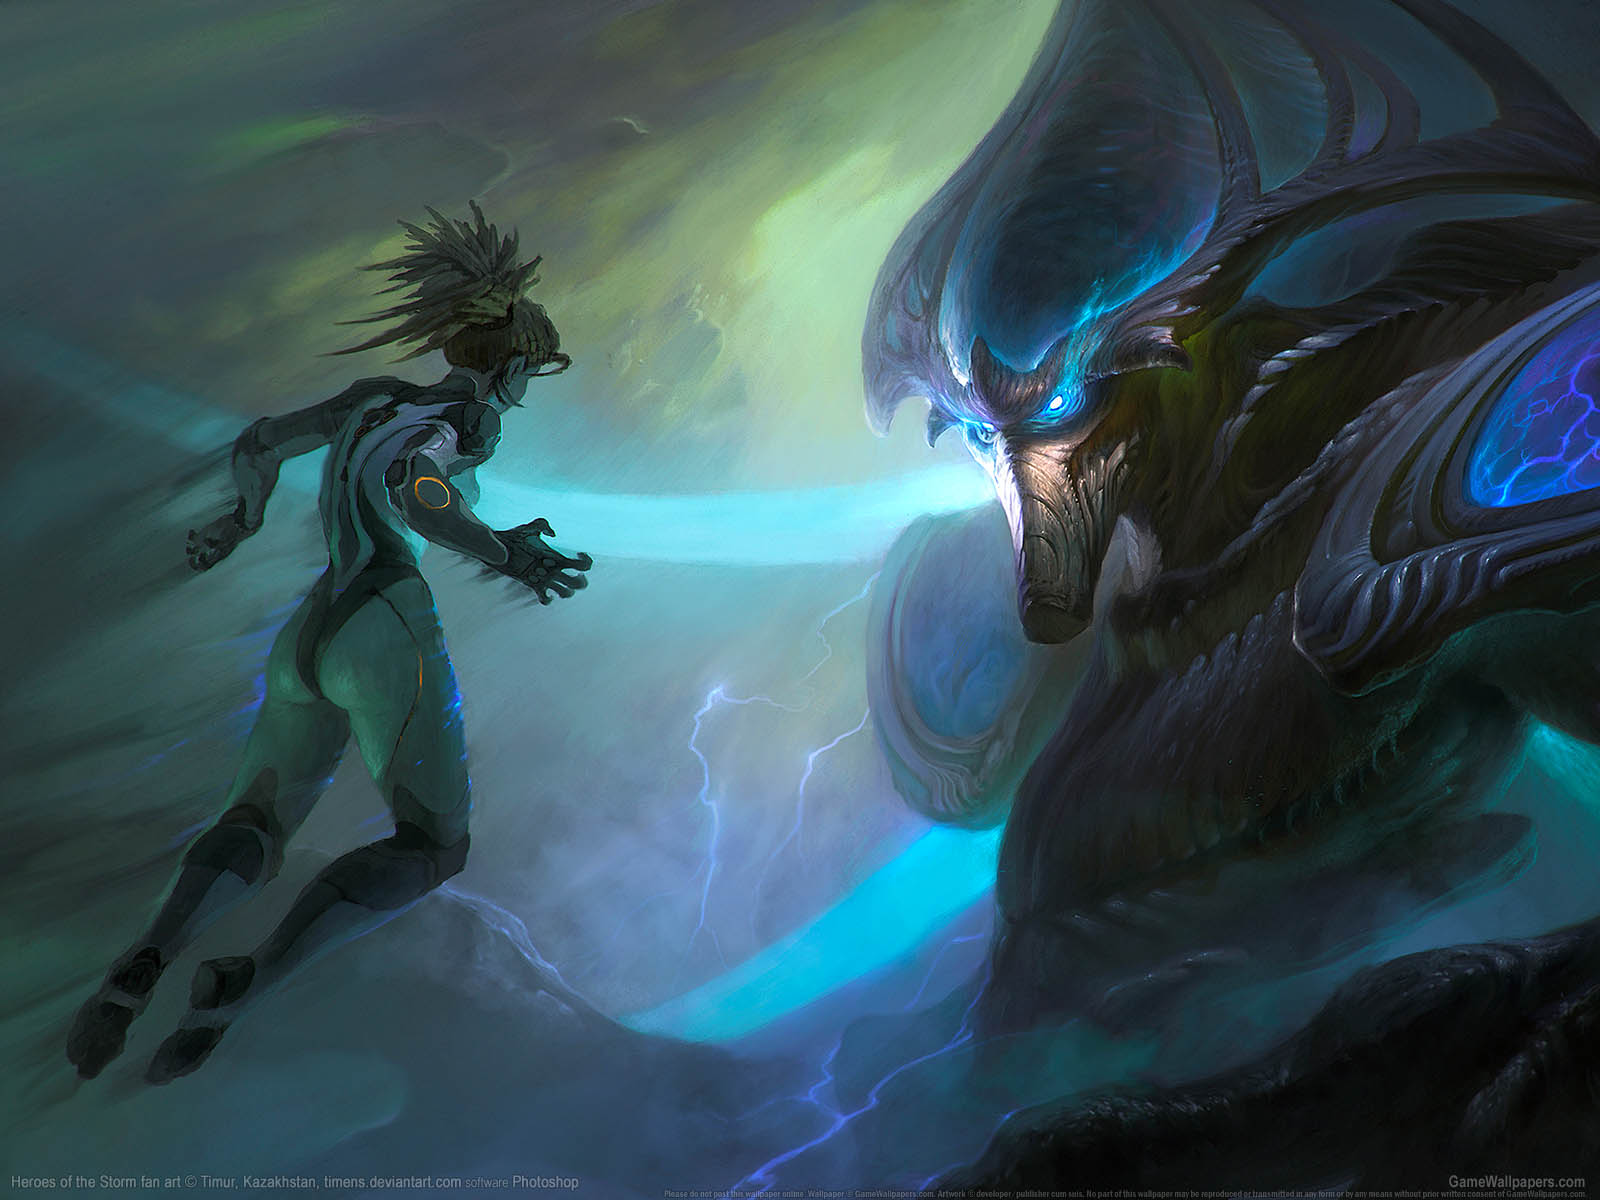 Heroes of the Storm fan art achtergrond 09 1600x1200